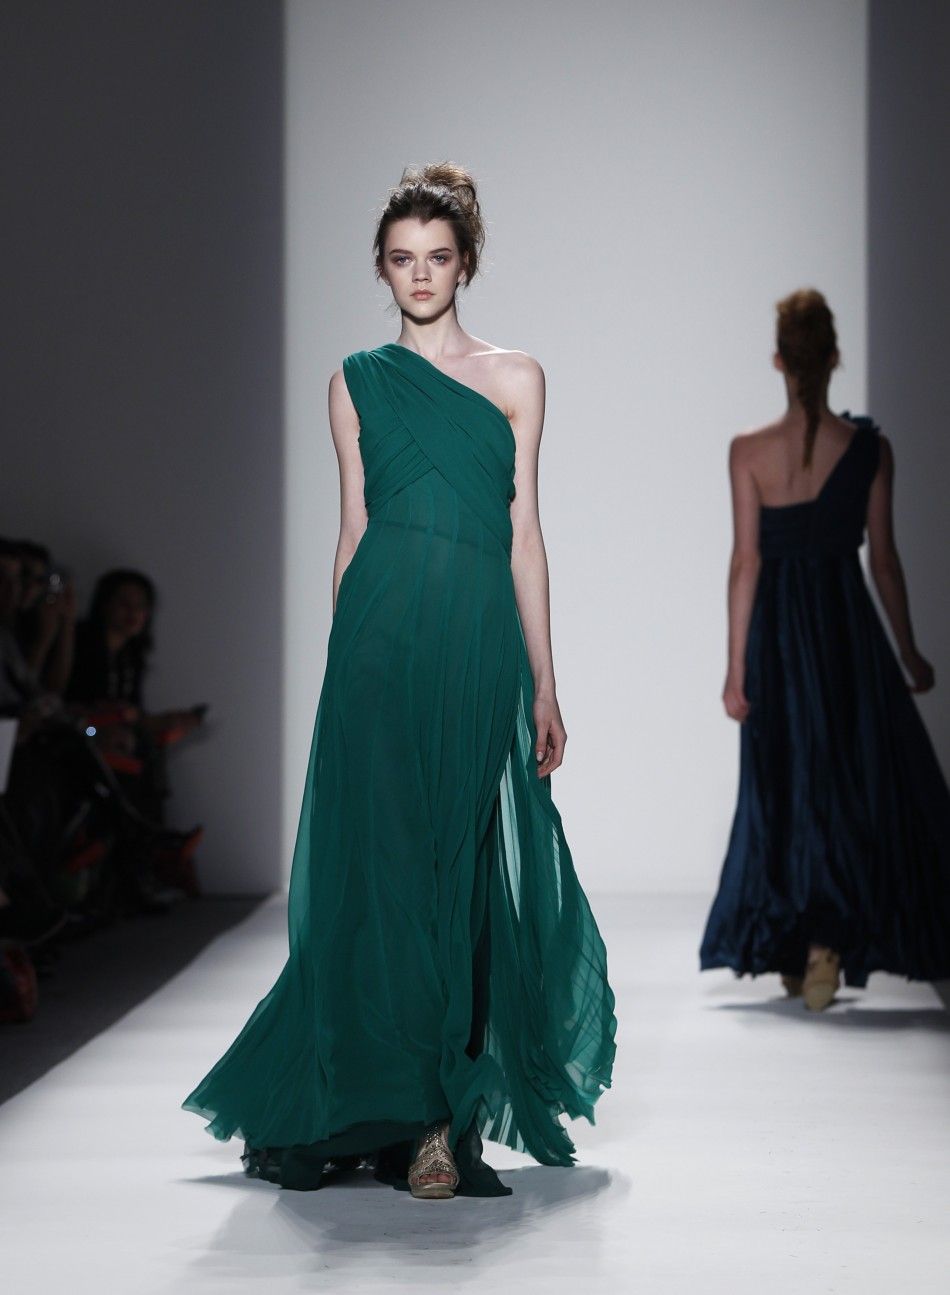 Best of New York Fashion Week 2012: Glamorous Evening Gowns and Chic ...